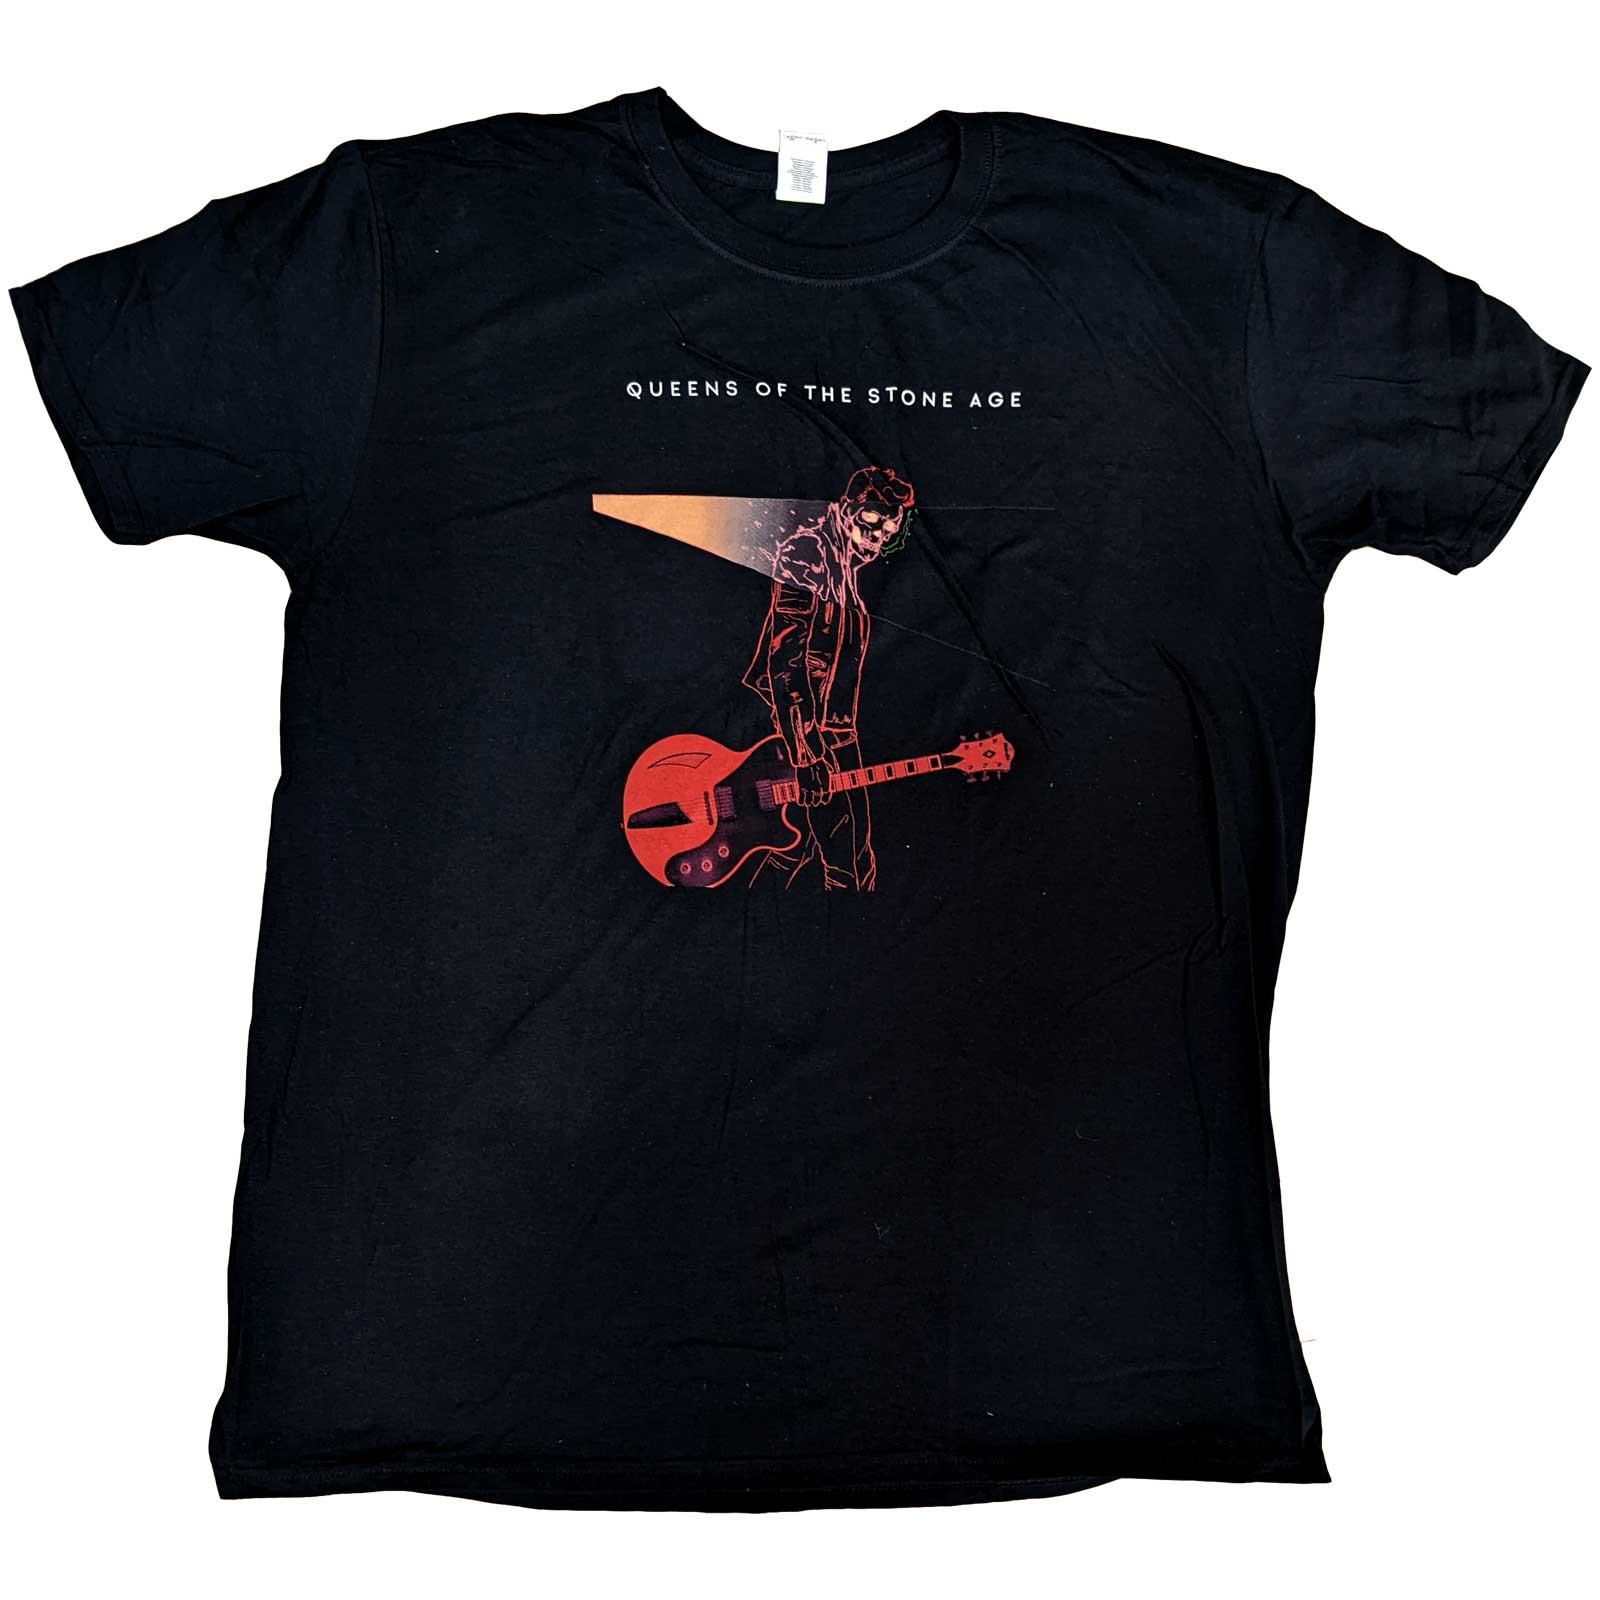 Queens of the Stone Age T-Shirt - Budapest 2018 Tour (Back Print) - Unisex Official Licensed Design - Worldwide Shipping - Jelly Frog